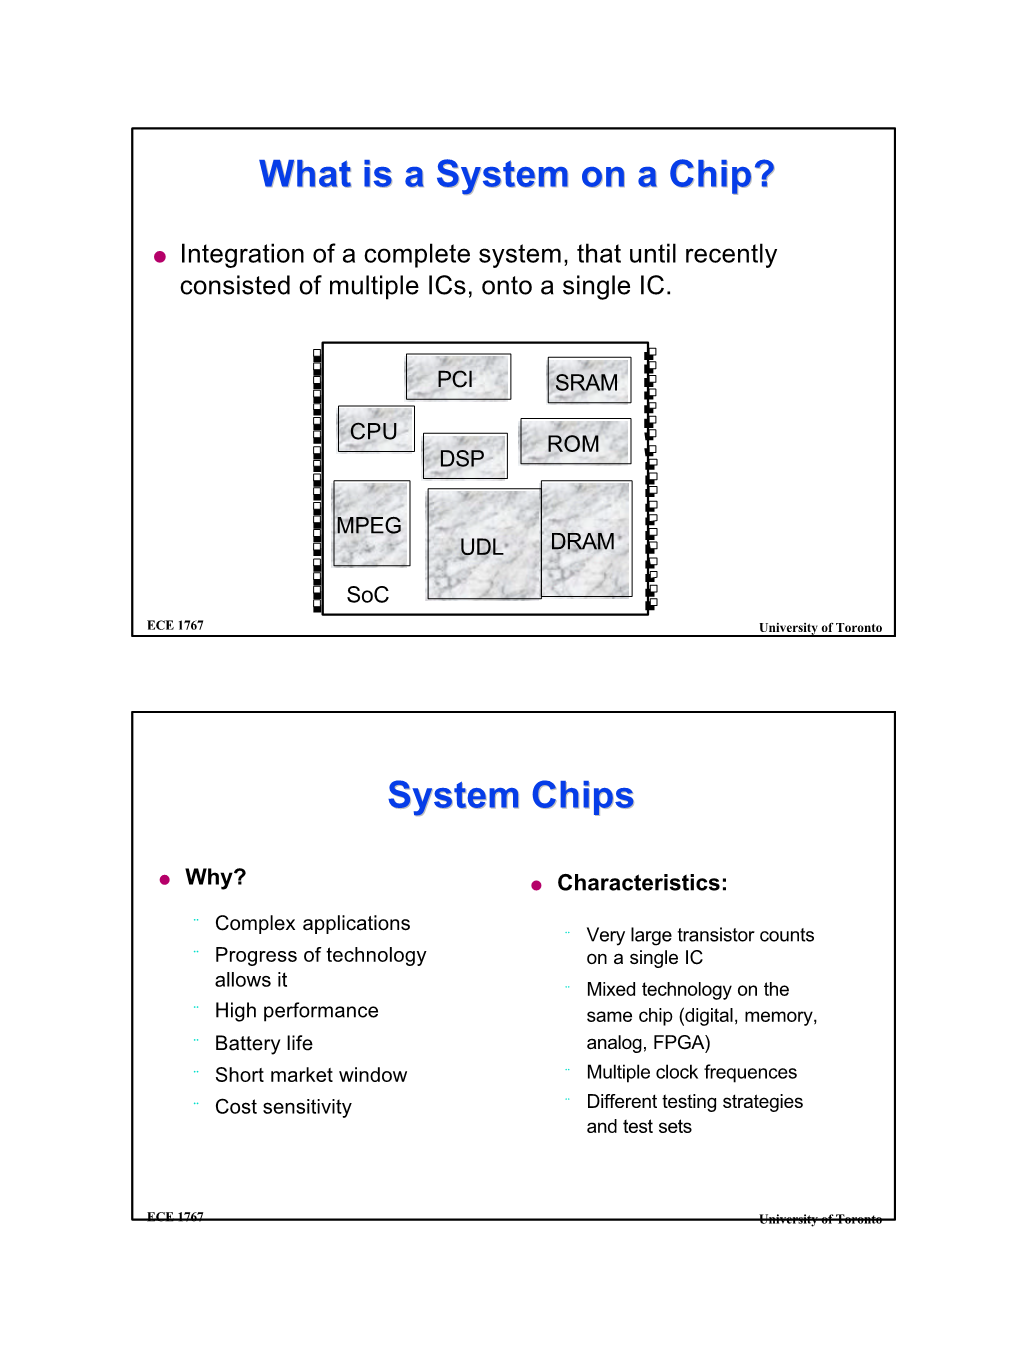 What Is a System on a Chip? System Chips